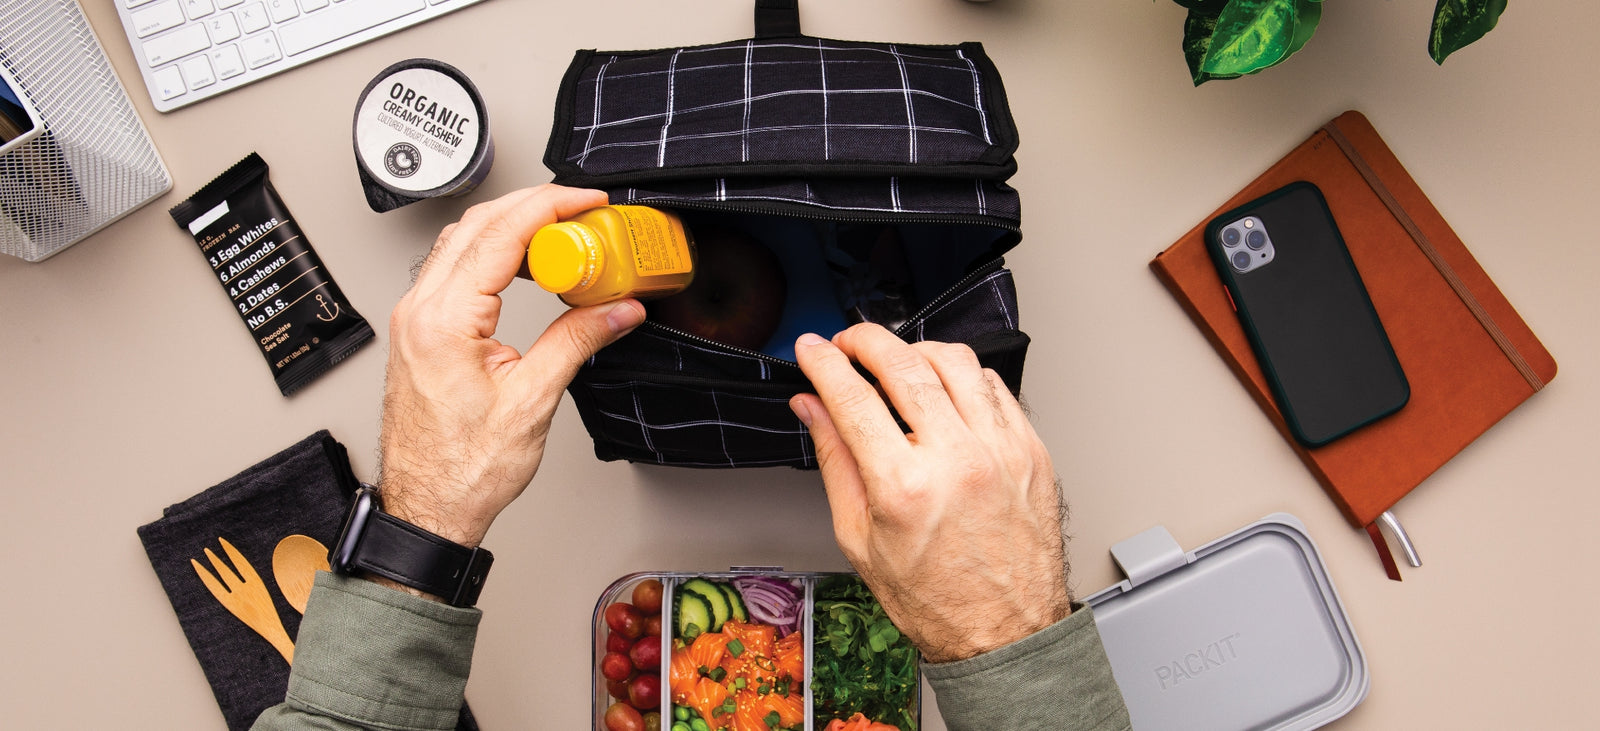 Best Freezable Lunch Bag: How to Keep Food Cold On-The-Go Without